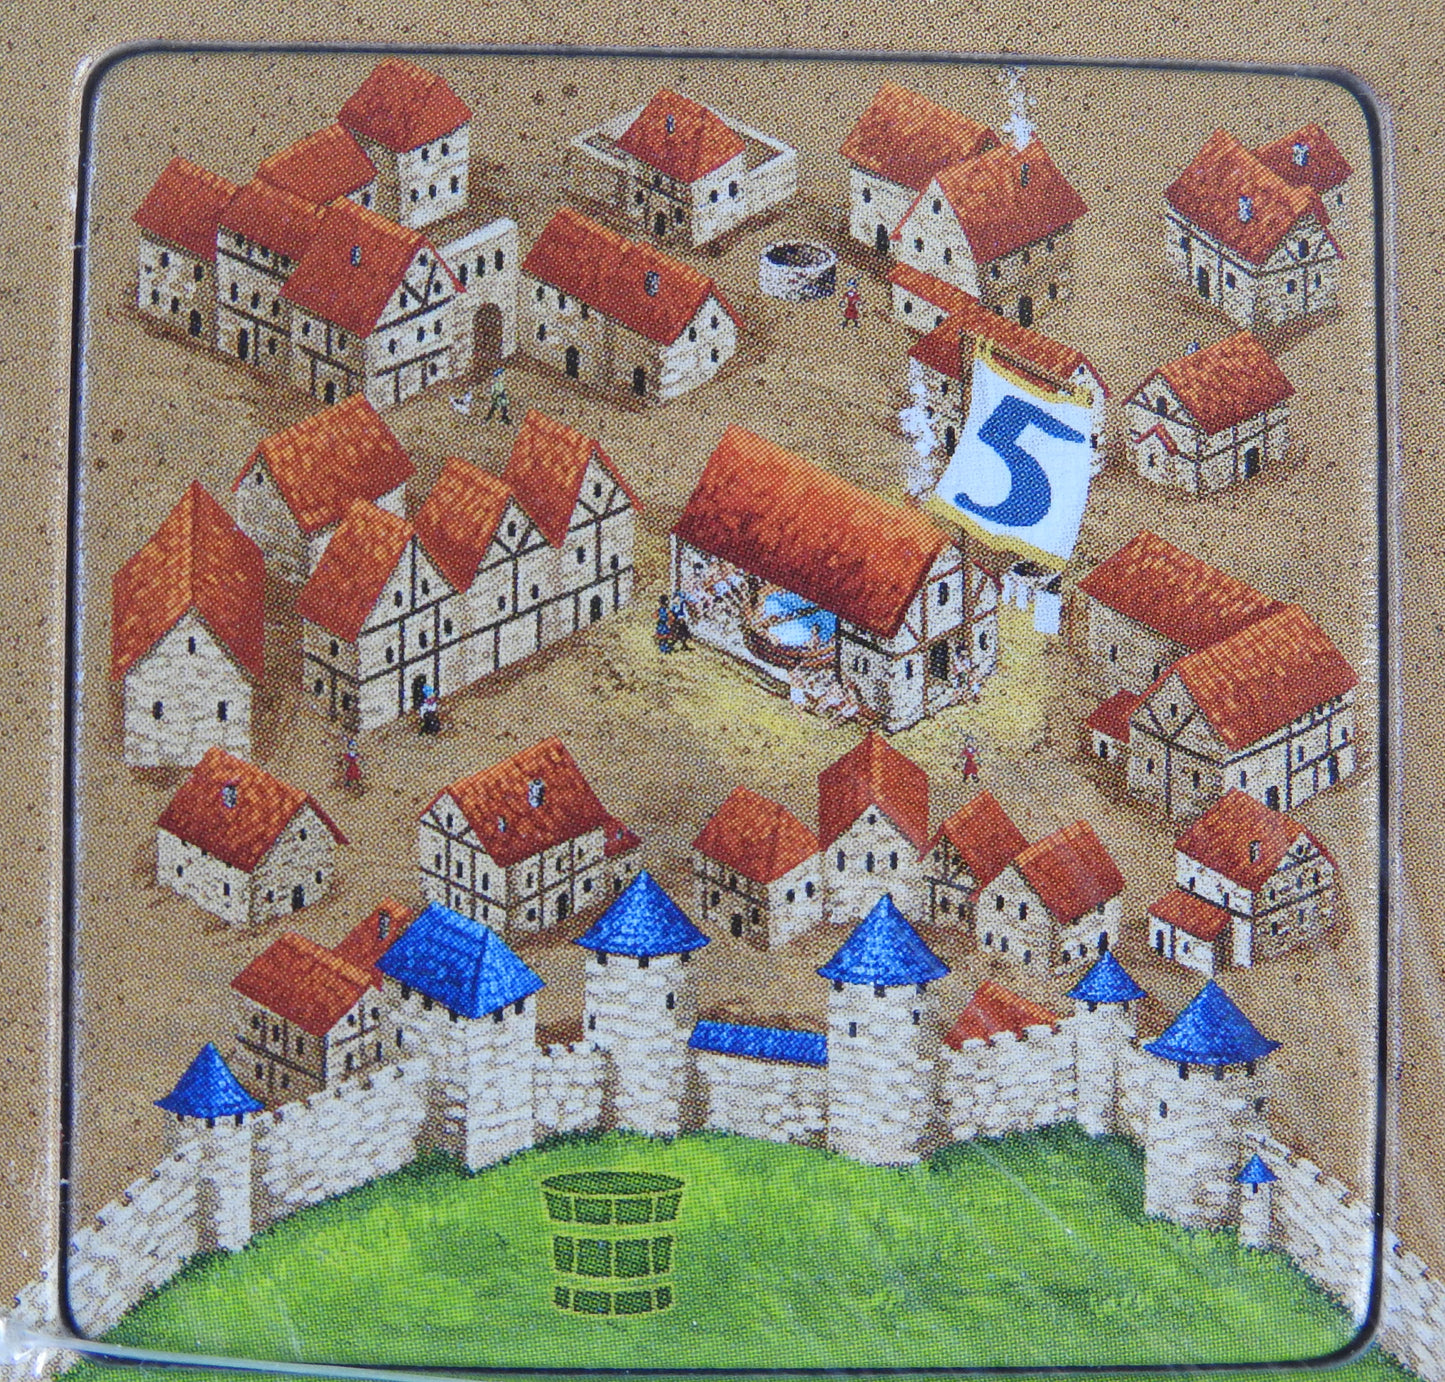 Close-up of one of the Barber Surgeons tiles, showing houses in the city.